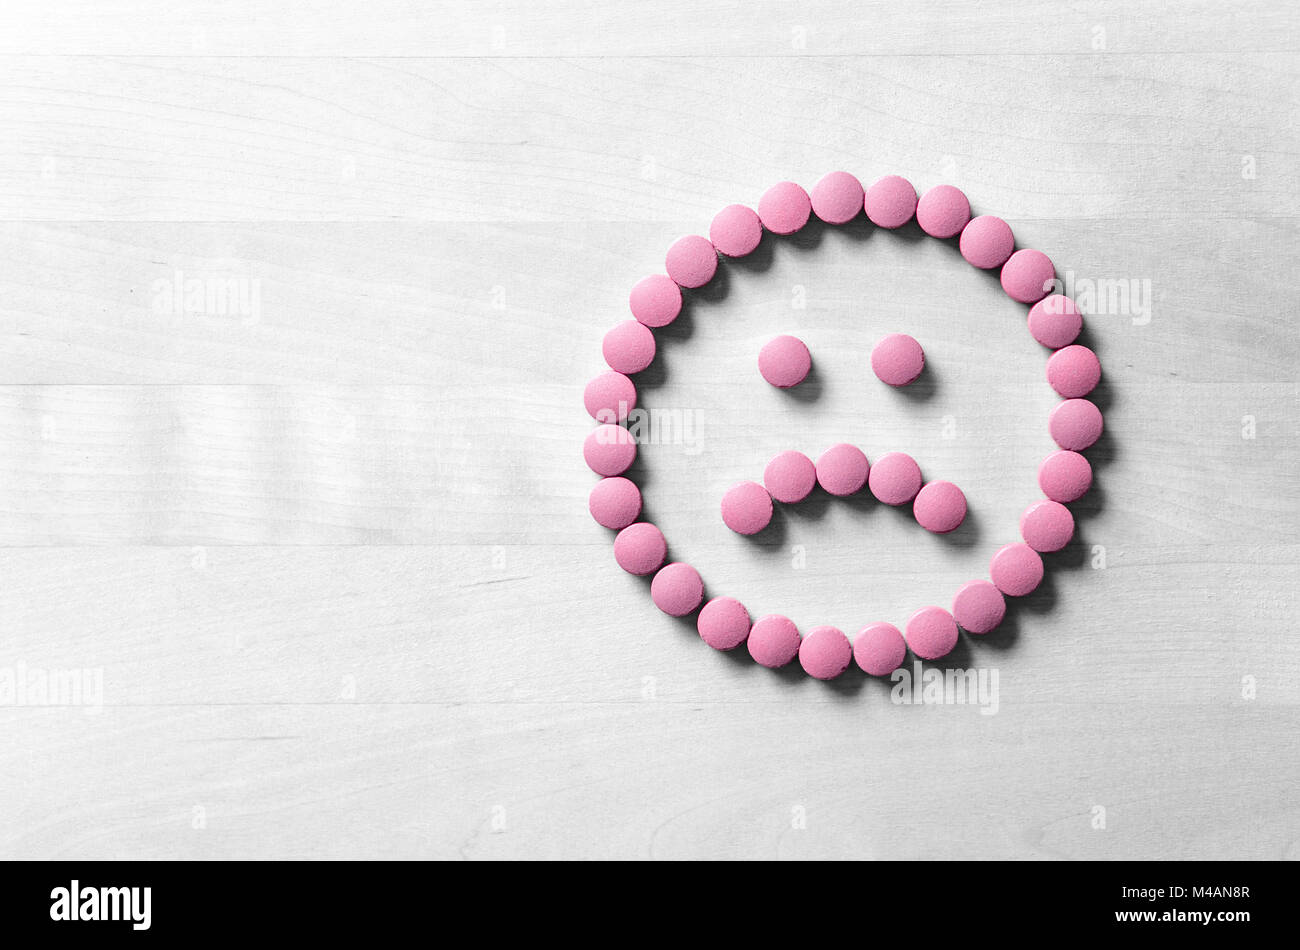 Clinical depression, mental illness and disorder or bad health services concept. Sad smiley face made from pills, medicine and tablets on wooden table Stock Photo